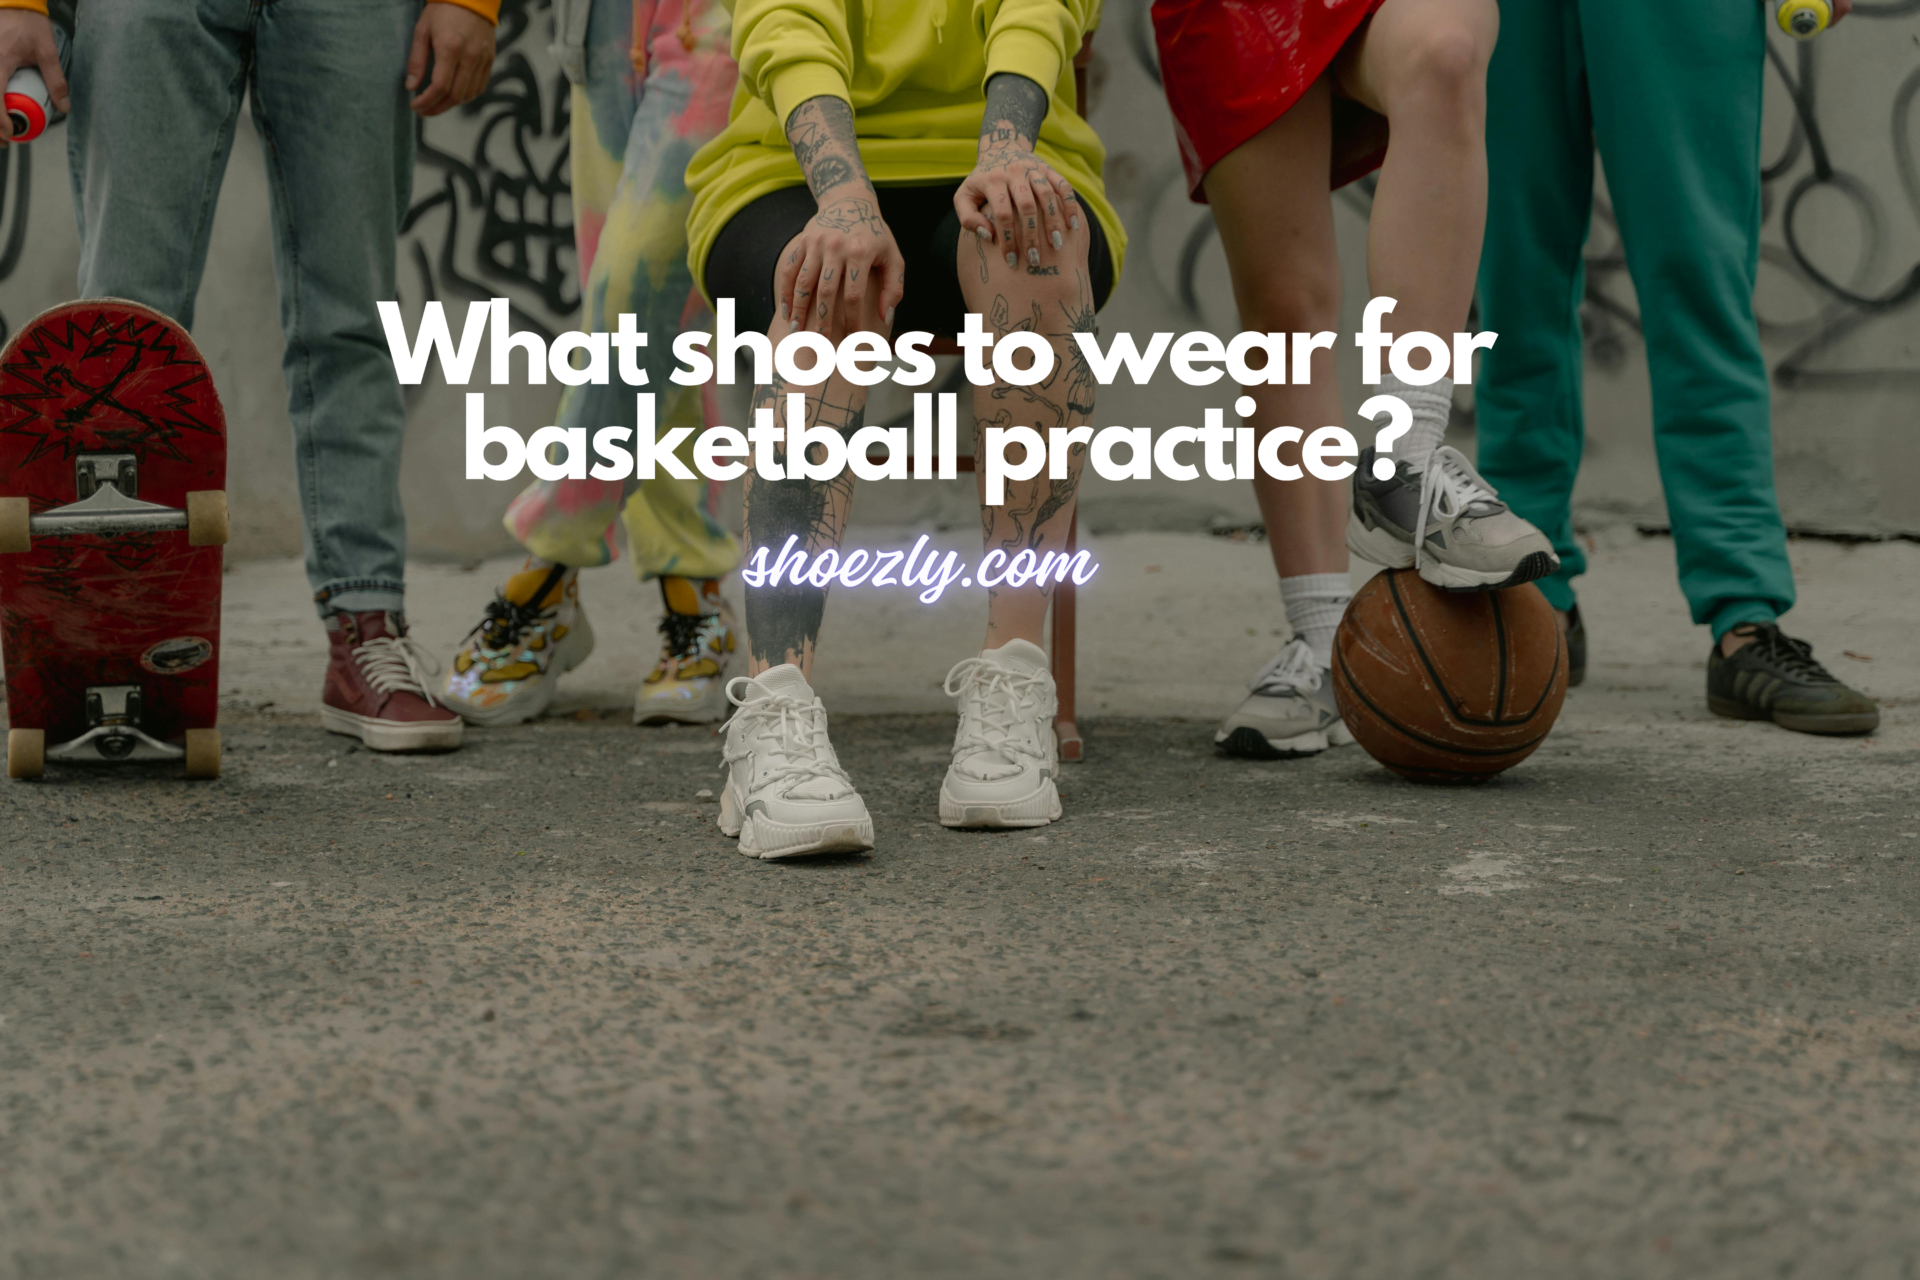 What shoes to wear for basketball practice?